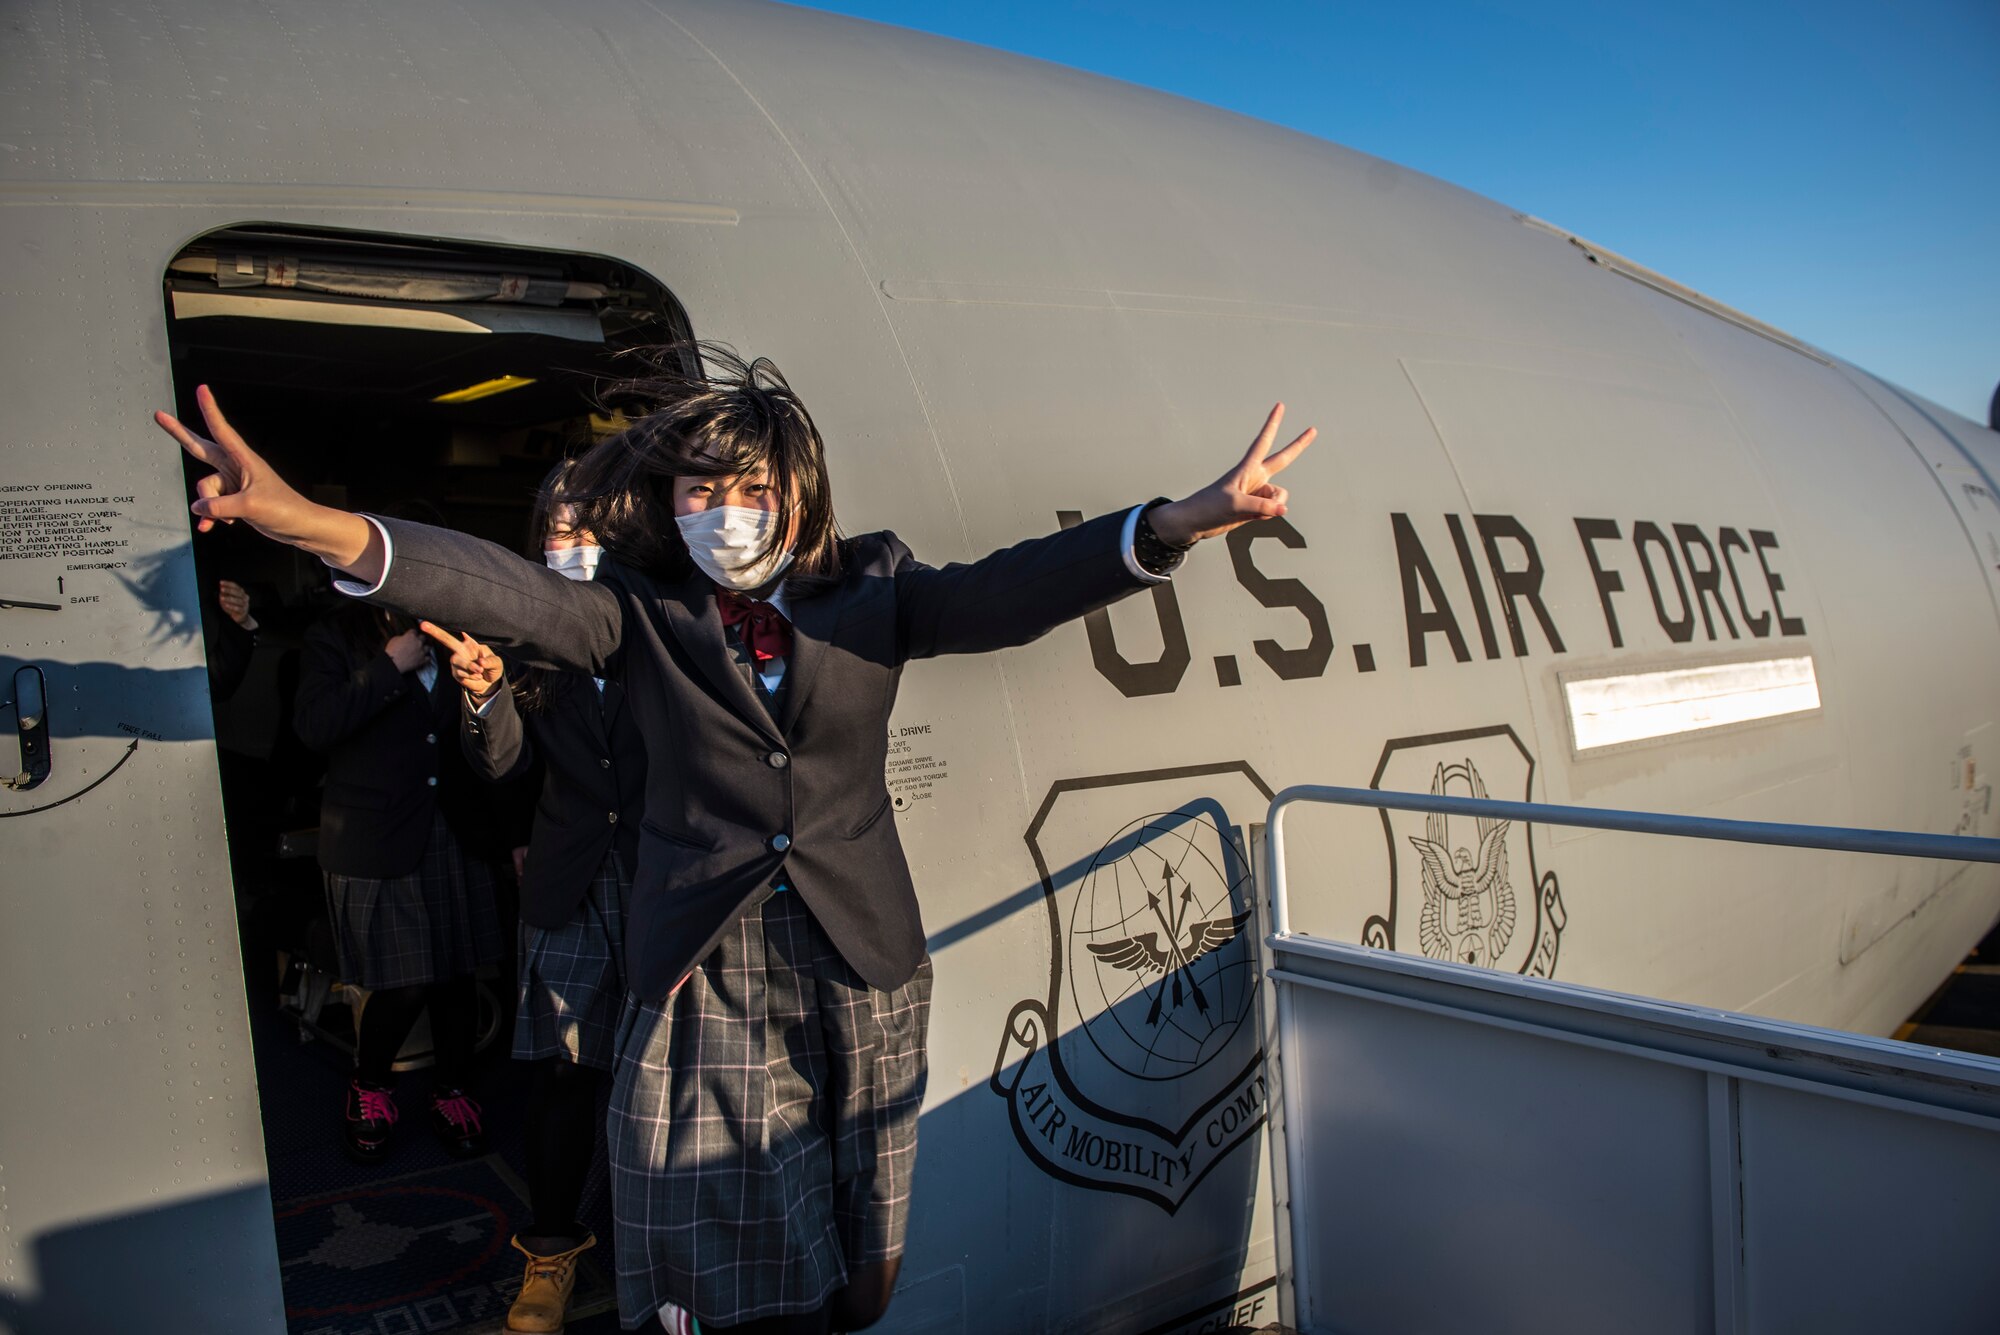 A high school student from Japan’s Toyama Prefecture exits a U.S. Air Force KC-10 Extender during a tour Jan. 19, 2013, at Yokota Air Base, Japan. Students toured Yokota as a part of a school trip to Akishima, a city neighboring the base. This was the students’ first opportunity to visit a U.S. air base and see military aircraft up close. (U.S. Air Force photo by Capt. Raymond Geoffroy)